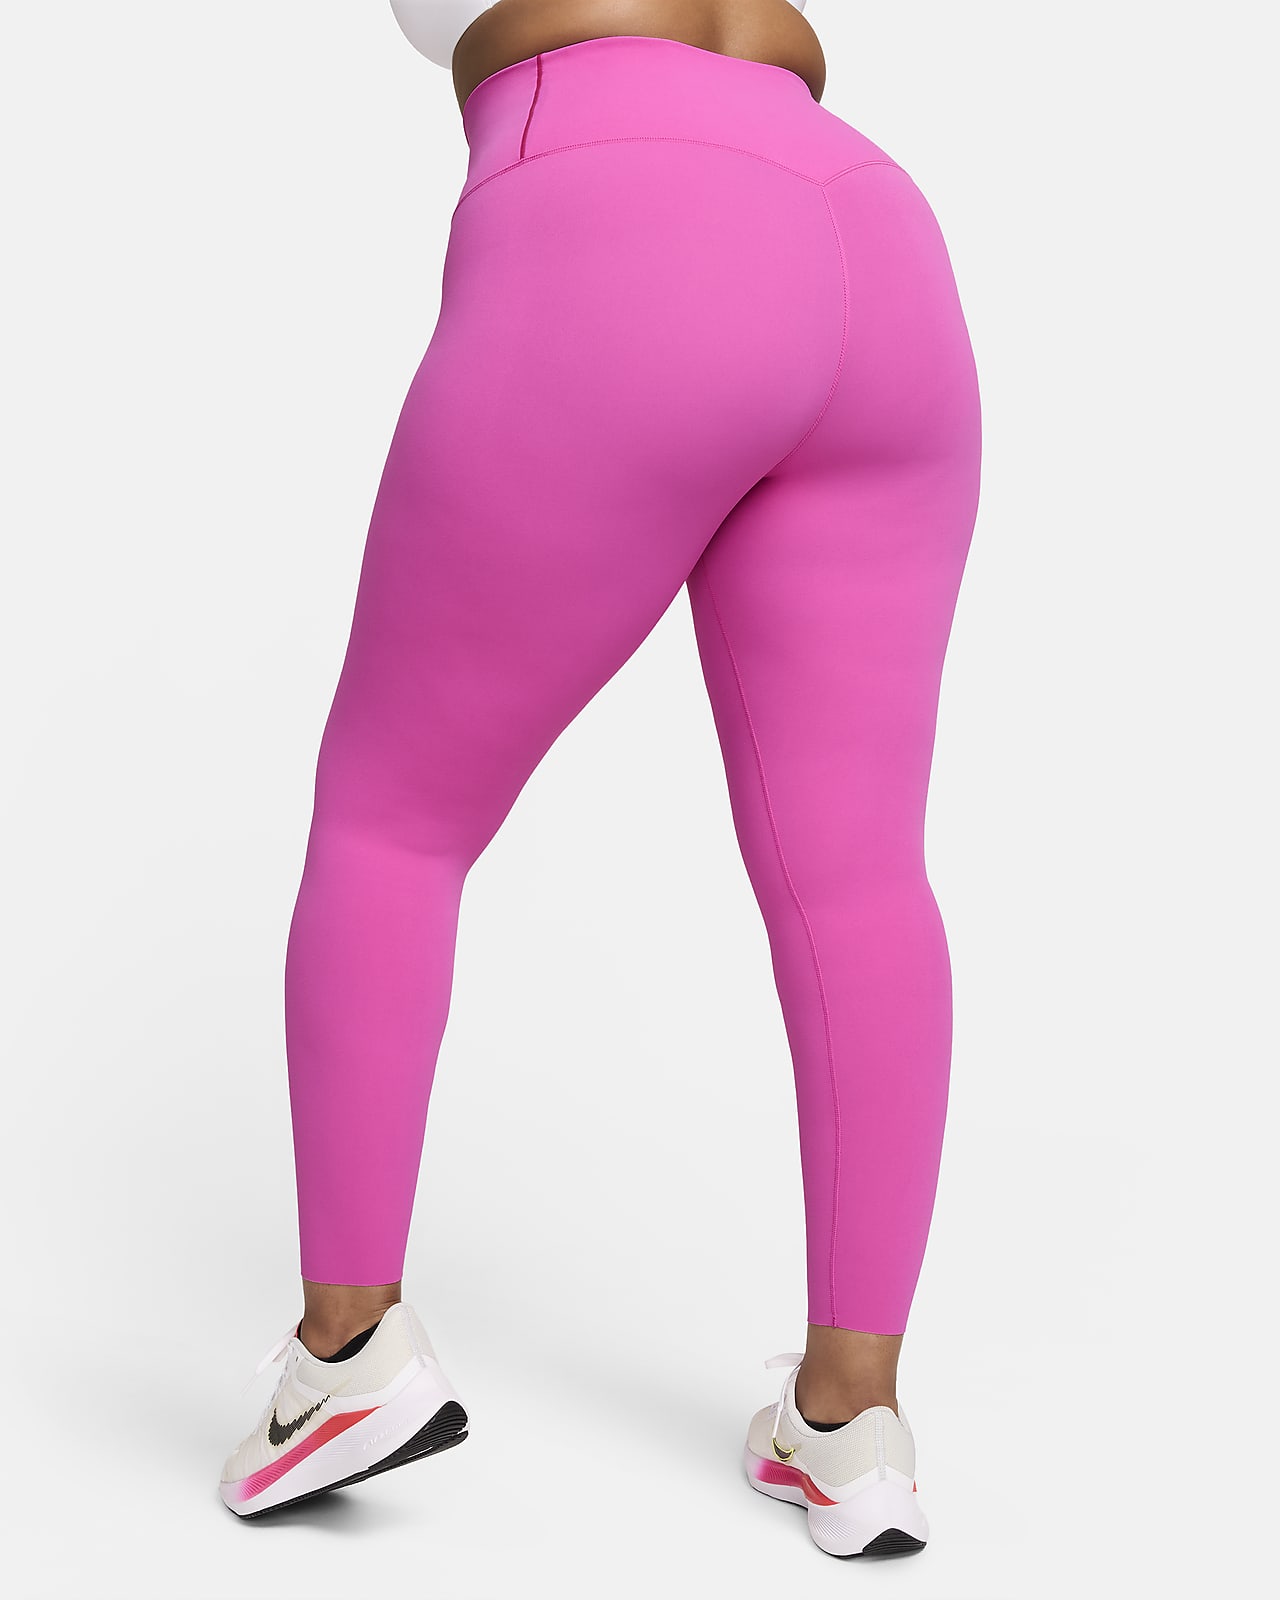 Nike Women's Zenvy Gentle-Support High-Waisted 7/8 Leggings in Pink -  ShopStyle Activewear Pants